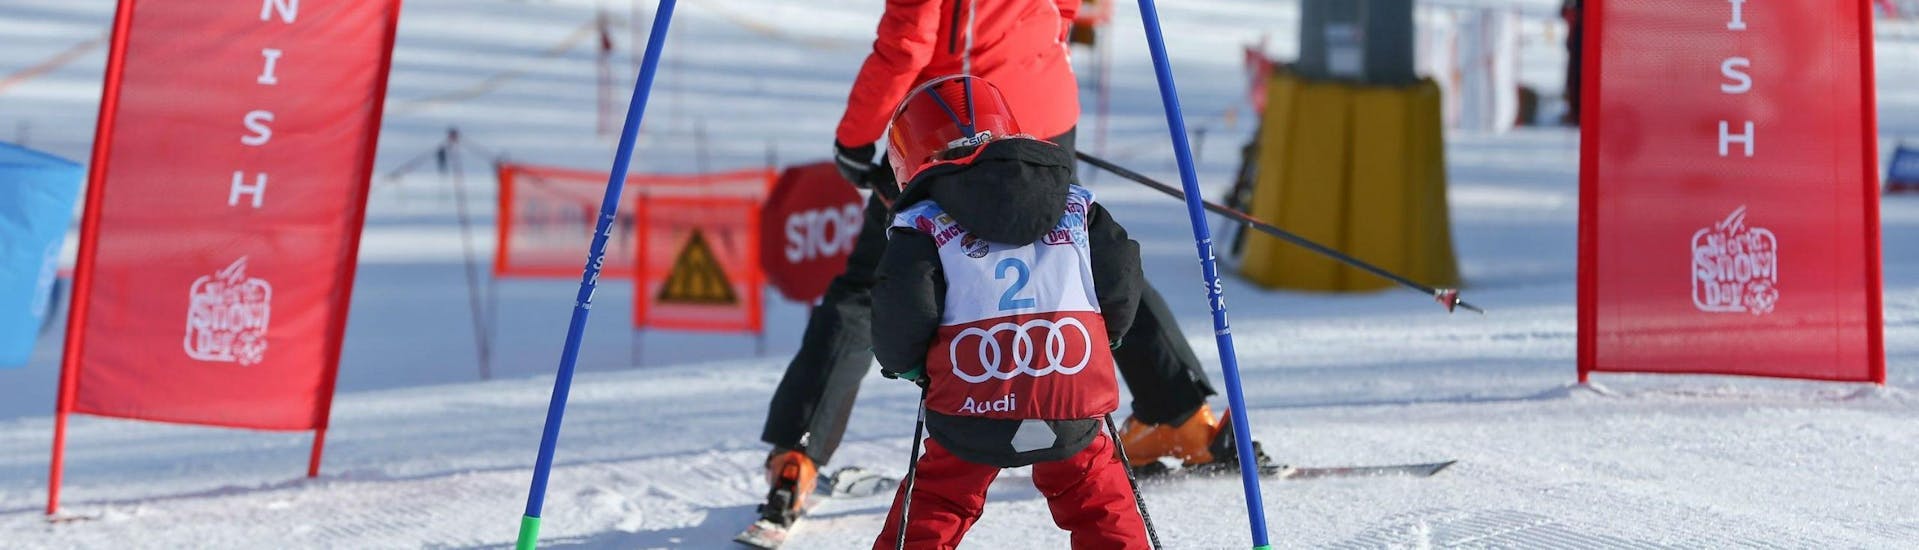 A young child is practicing its skiing technique on a race course in Cortina d'Ampezzo during one of its Kids Ski Lessons "Smart" (4-12 years) - With Experience organised by the ski school Scuola Sci Cortina.